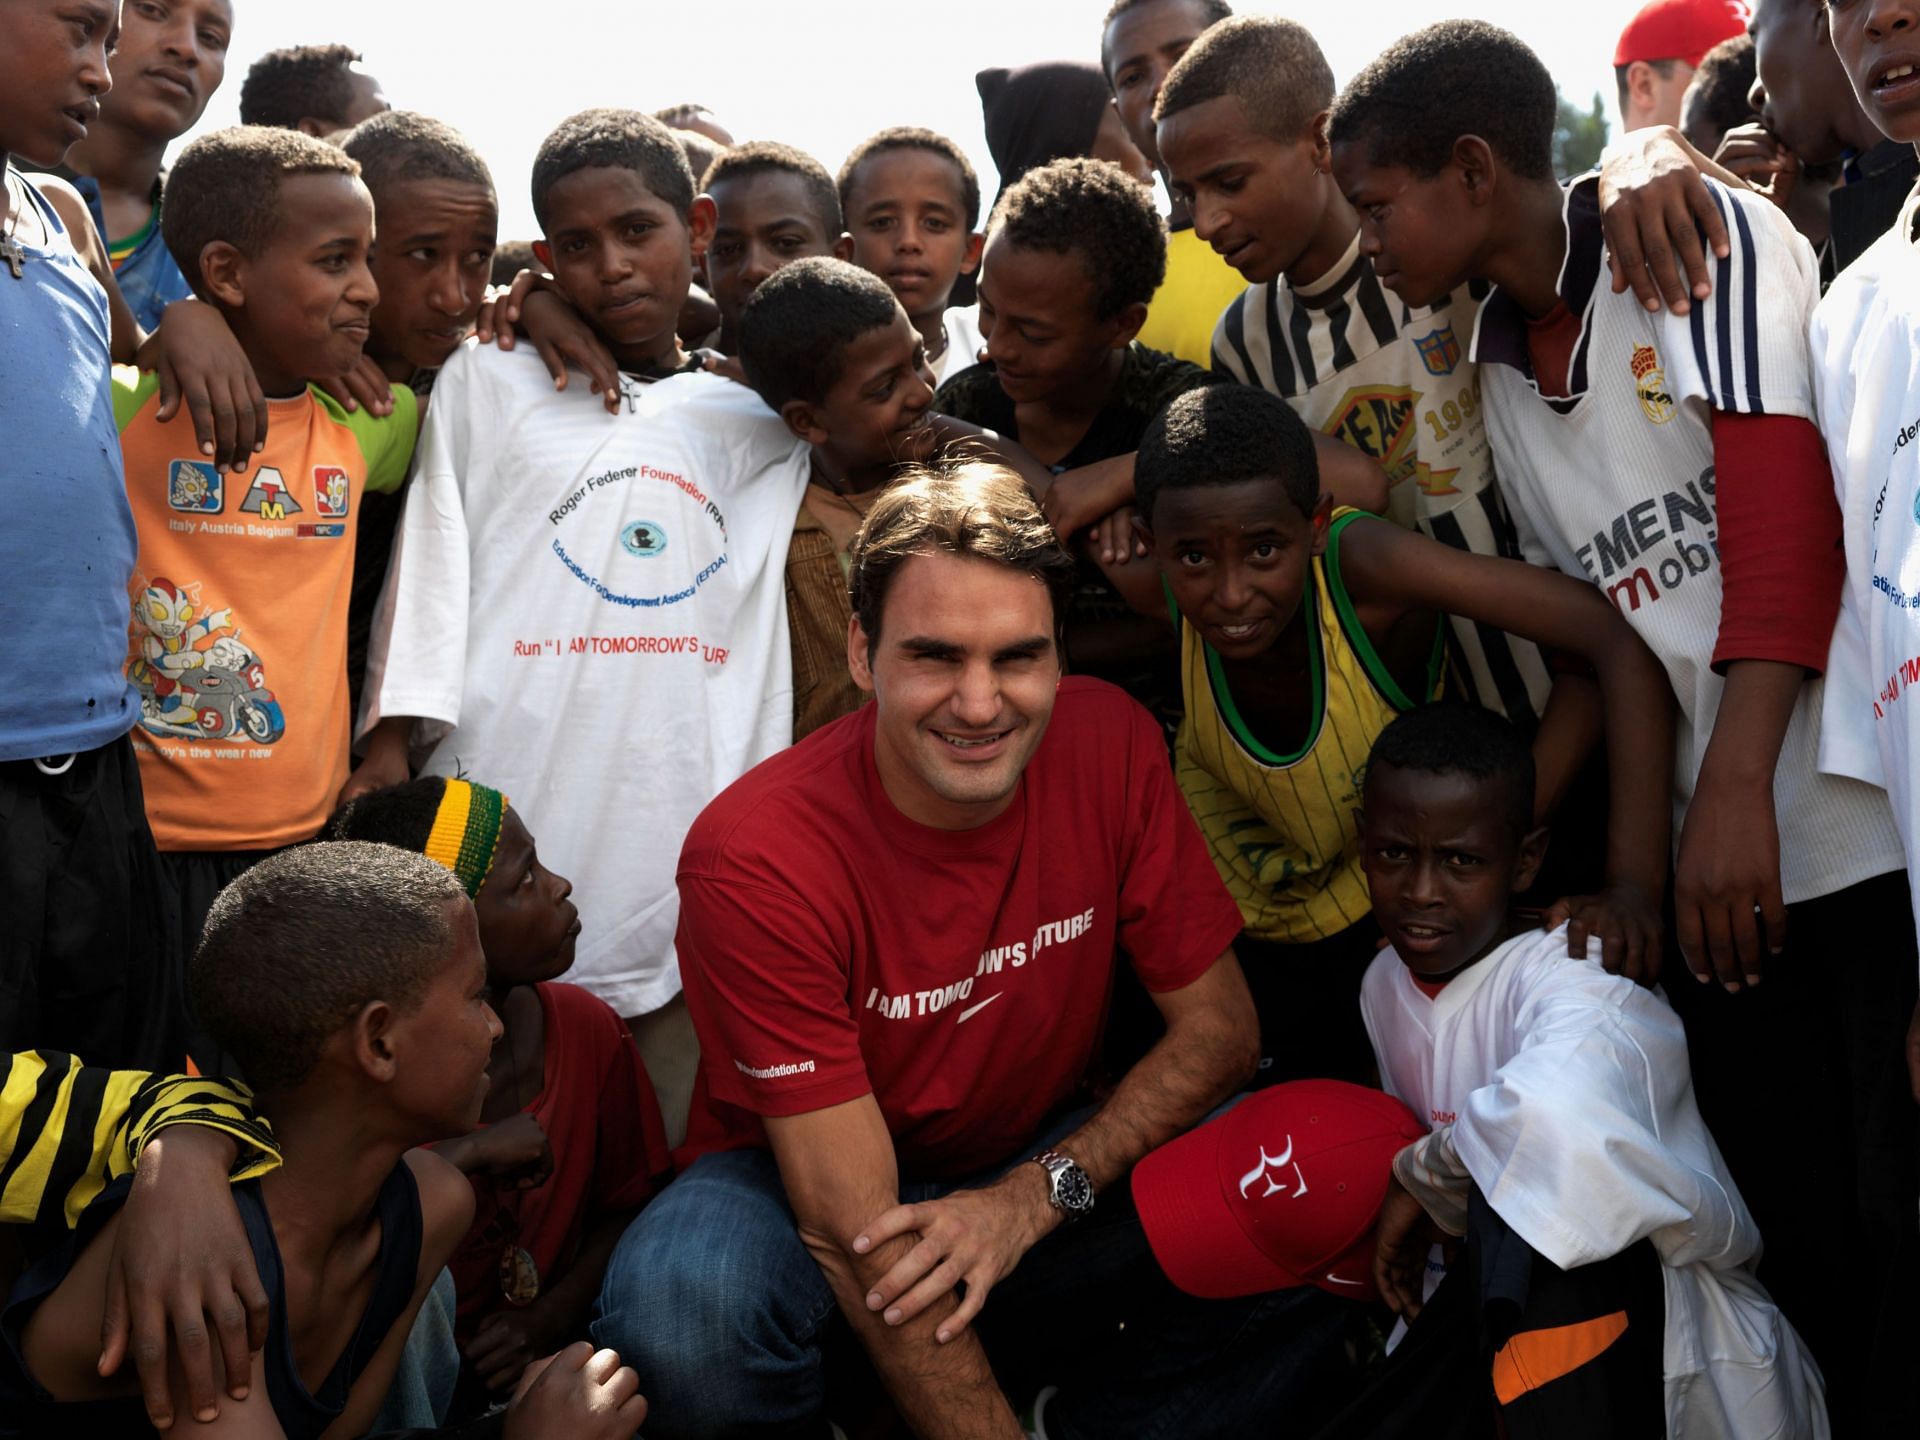 Roger Federer previously visited Ethiopia in 2010 for the same cause